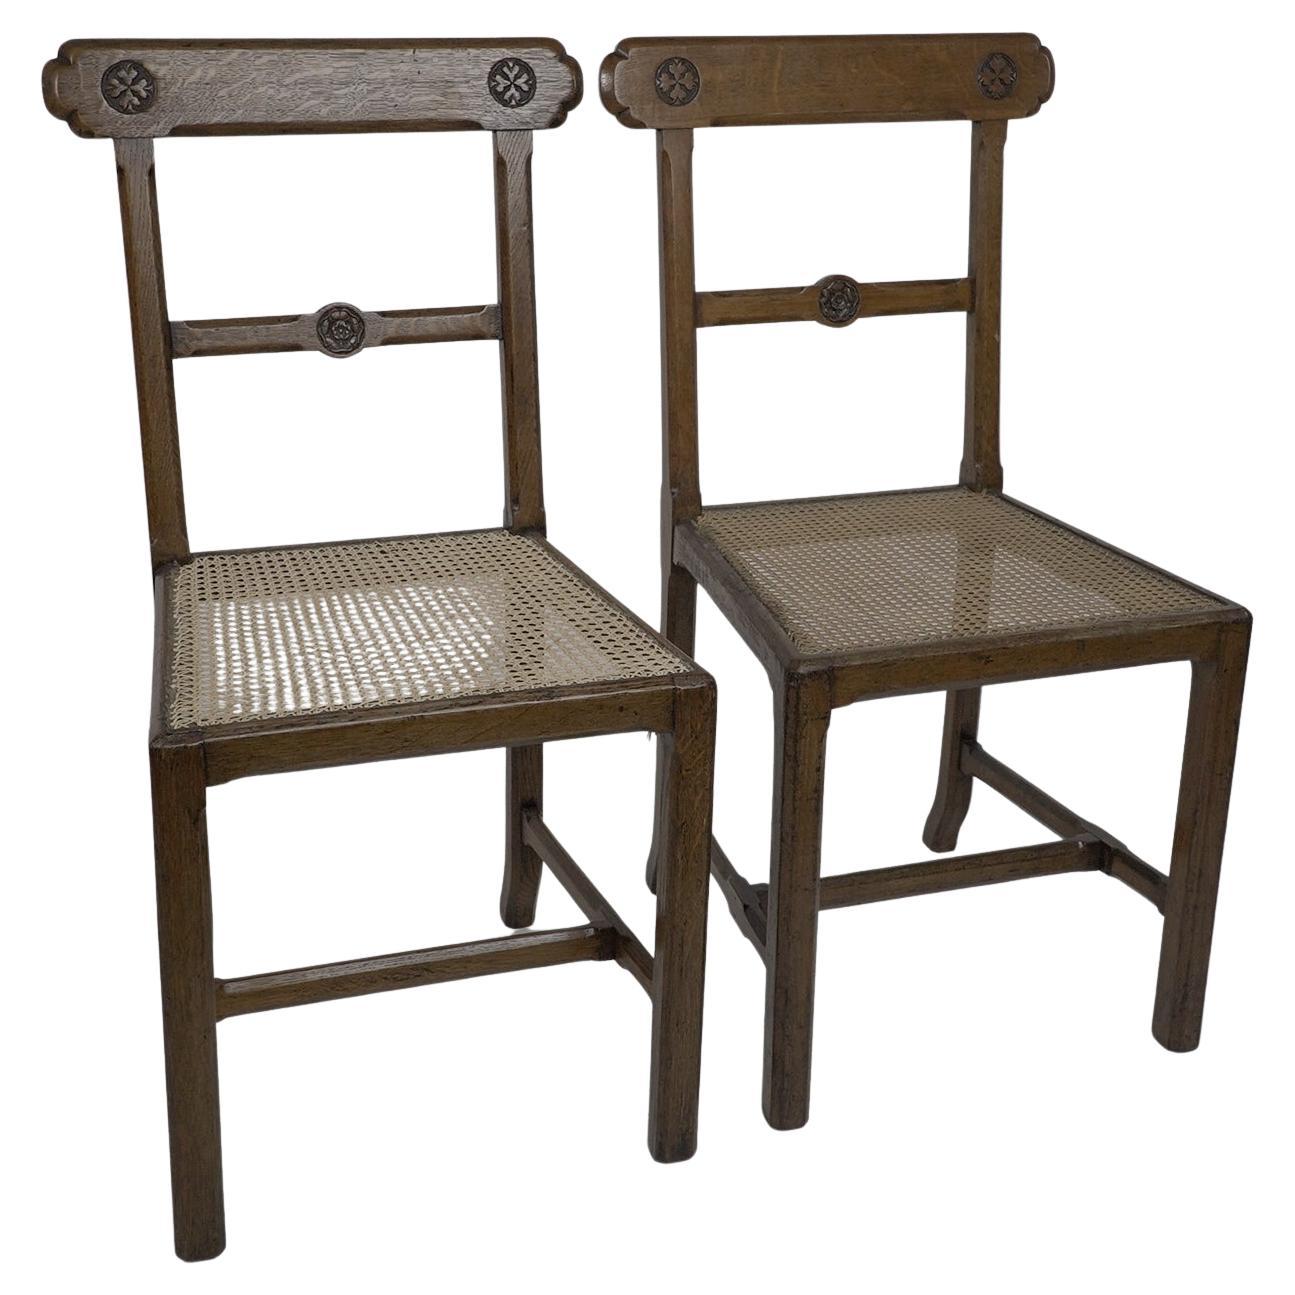 J.G.Crace attributed. In the style of AWN Pugin. A pair of Gothic Revival chairs